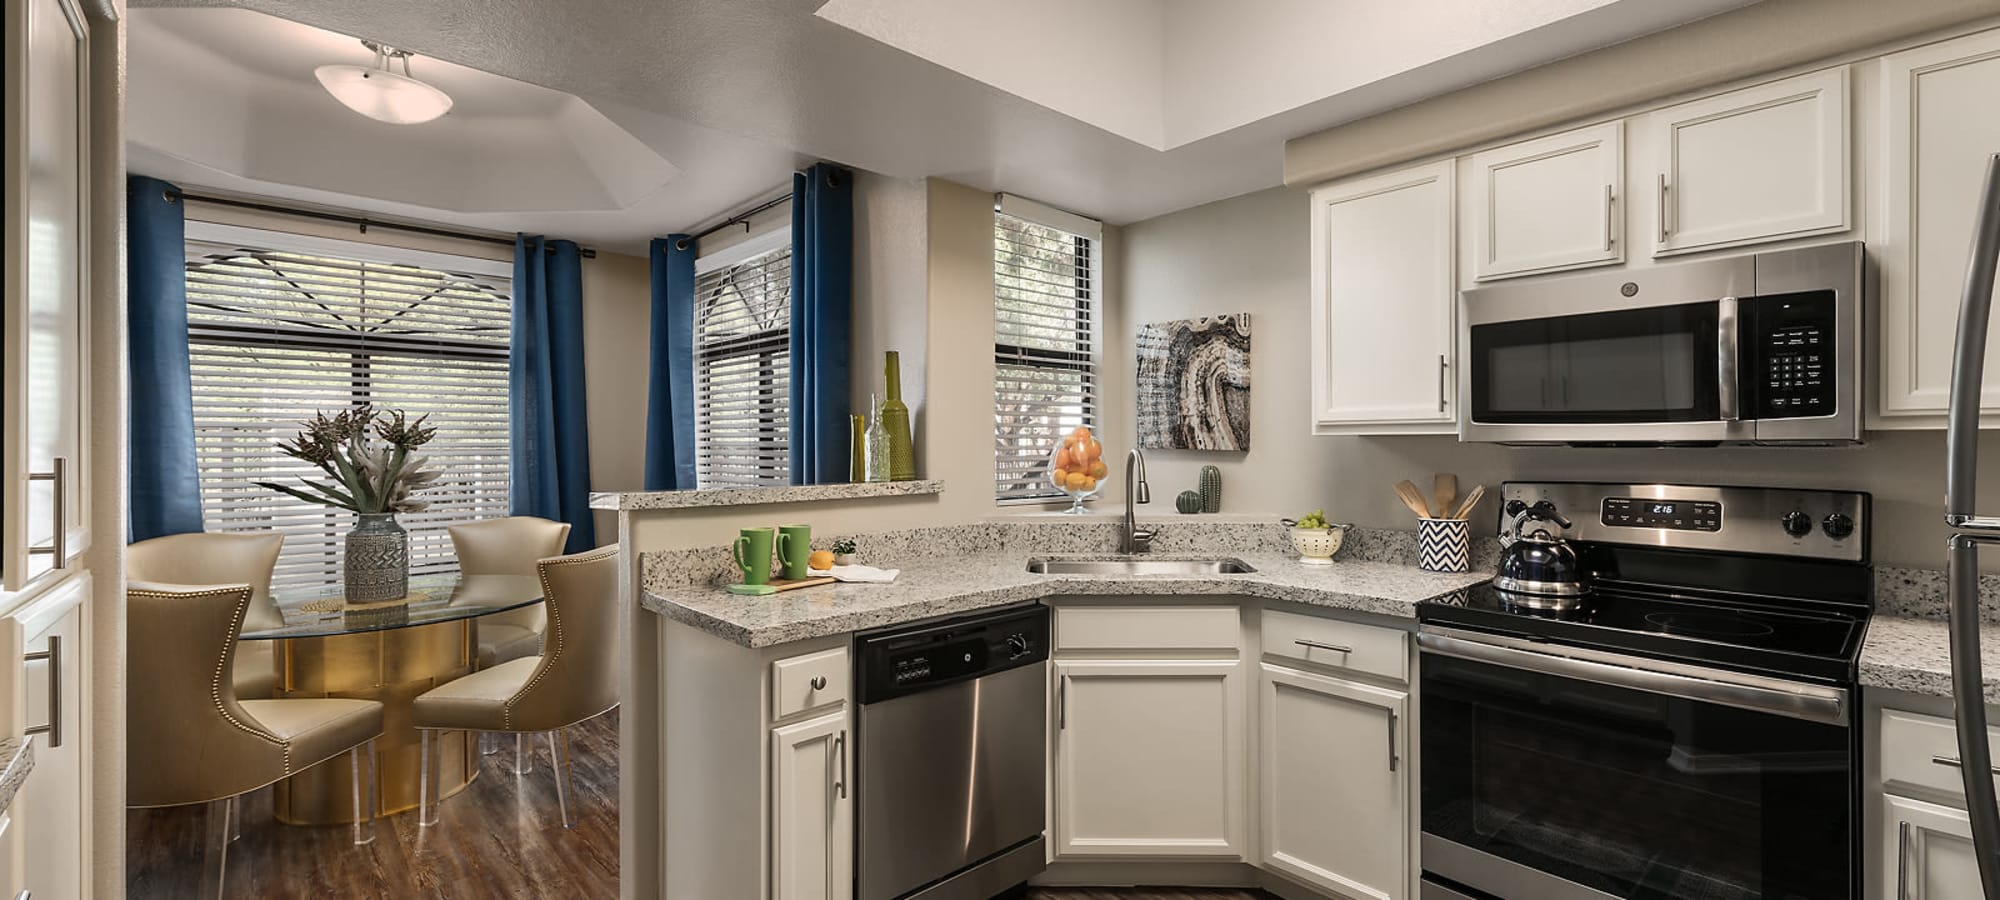 Beautiful kitchen with stainless-steel appliances at San Palmas in Chandler, Arizona